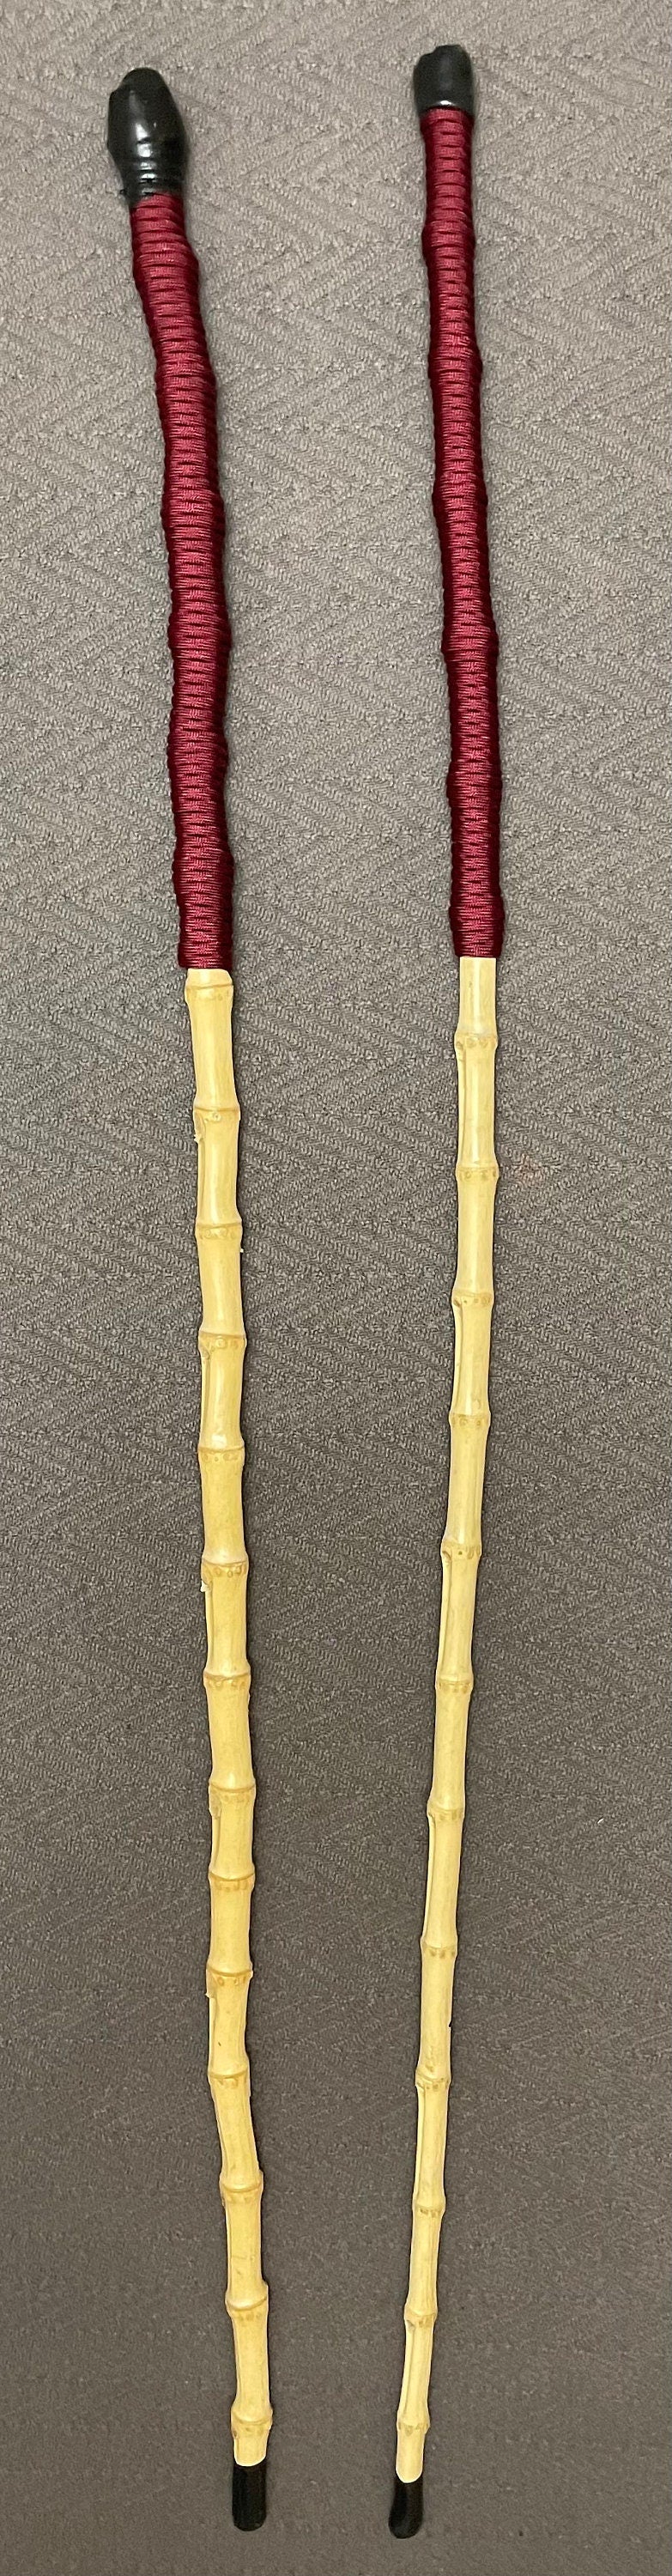 Whangee Canes with Burgndy Paracord Handles